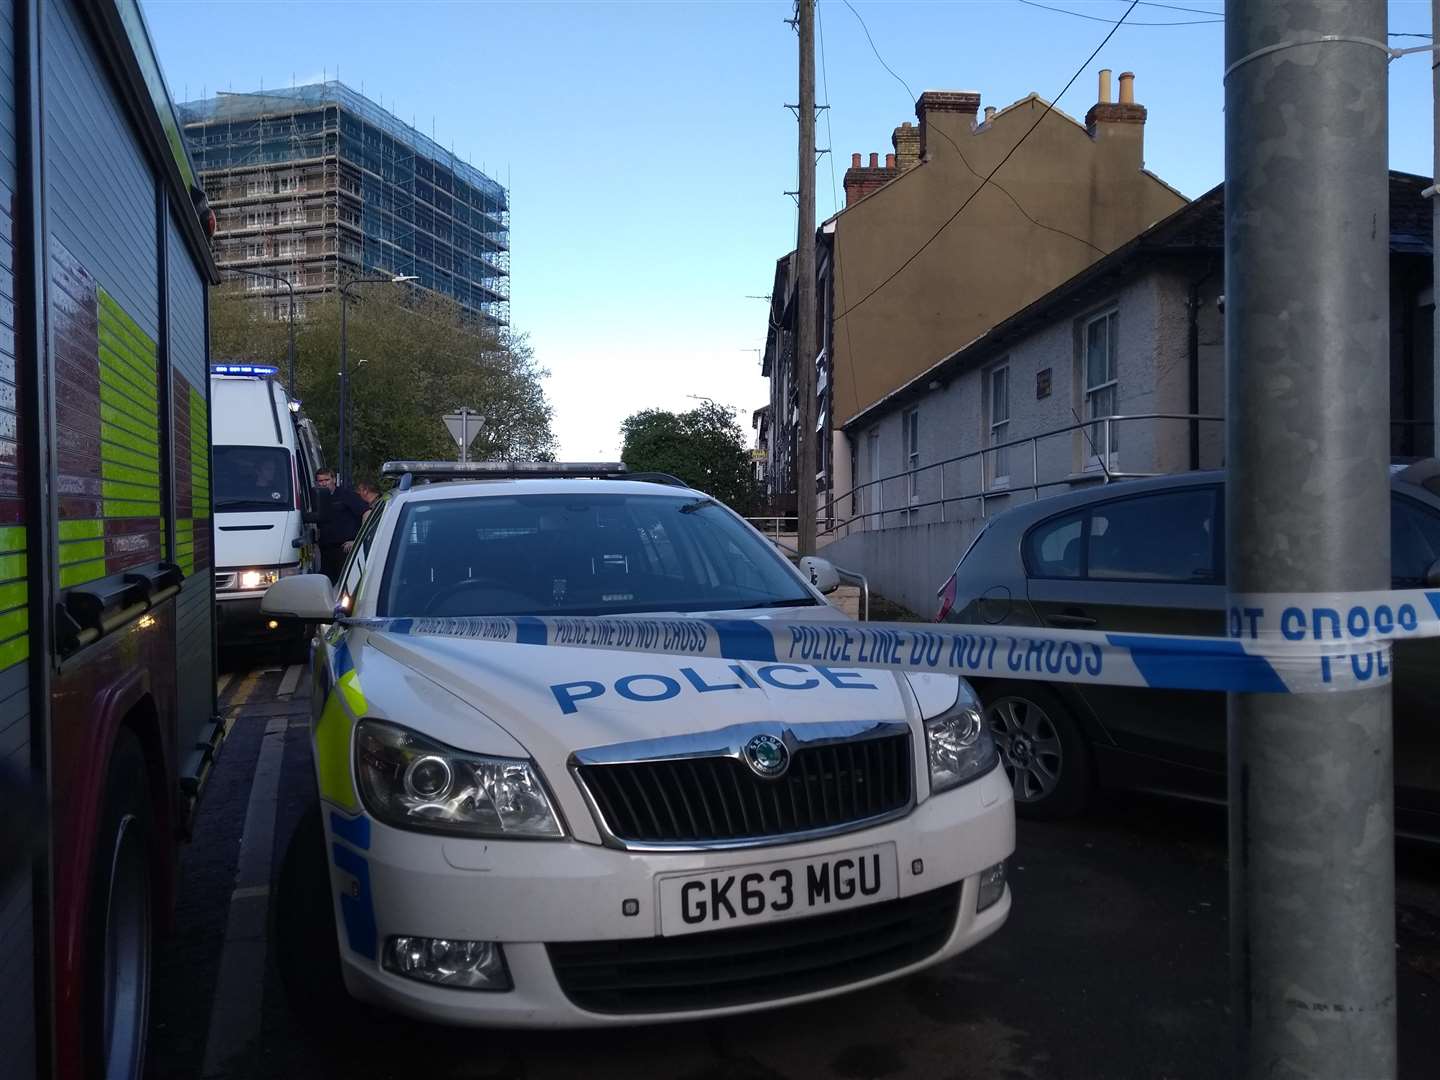 Maidstone Mosque confirmed it had received a "hate letter" with "white powder" inside. (1709644)